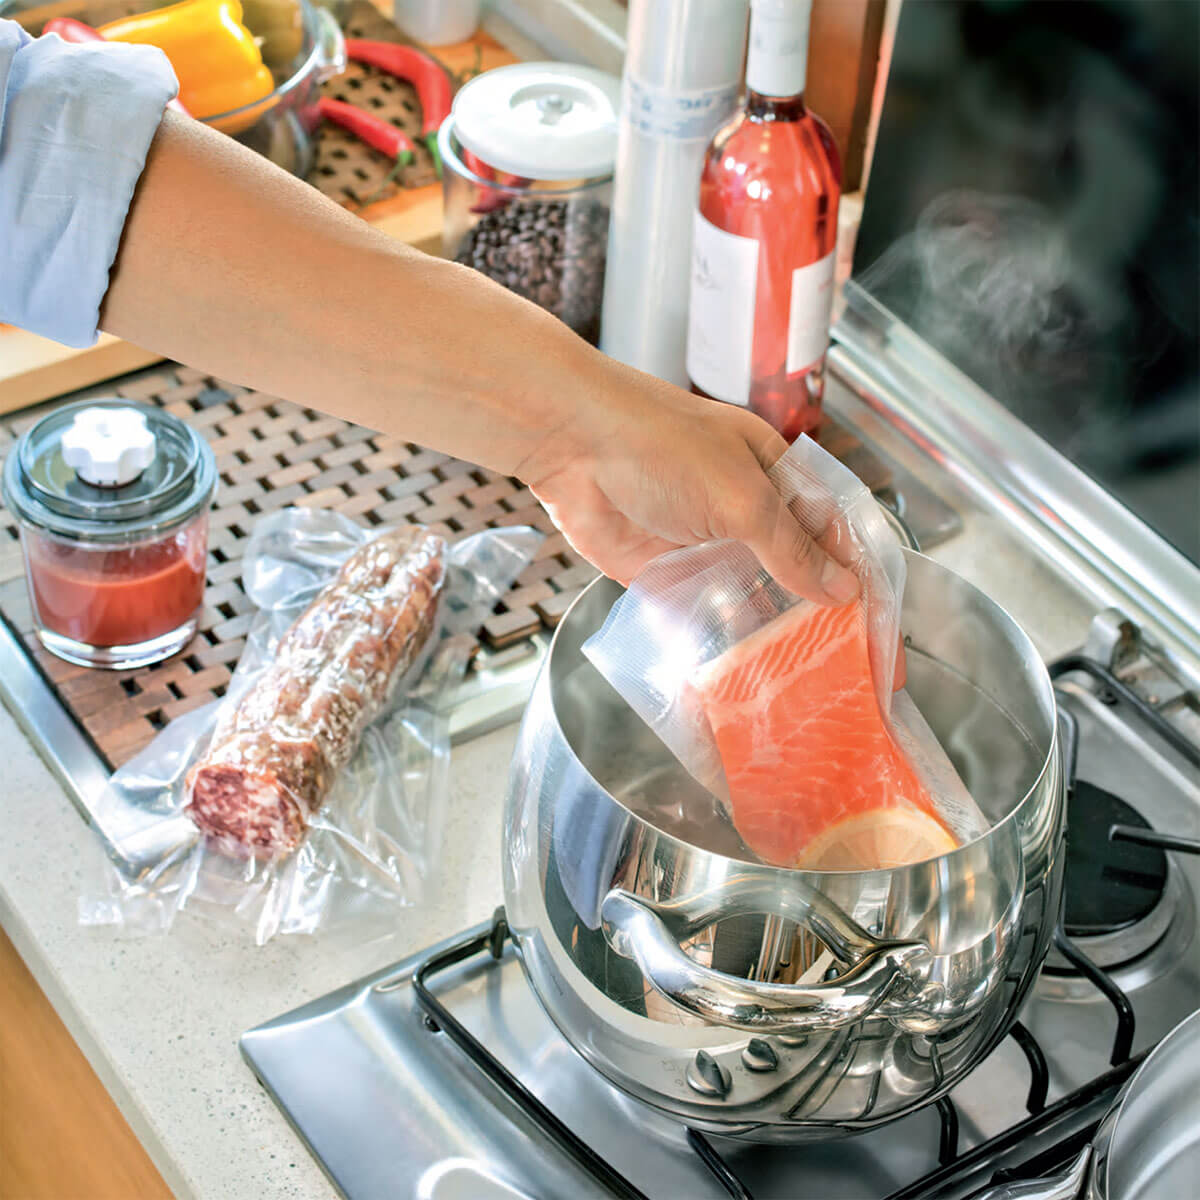 Magic Vac bag being used in sous-vide cooking.